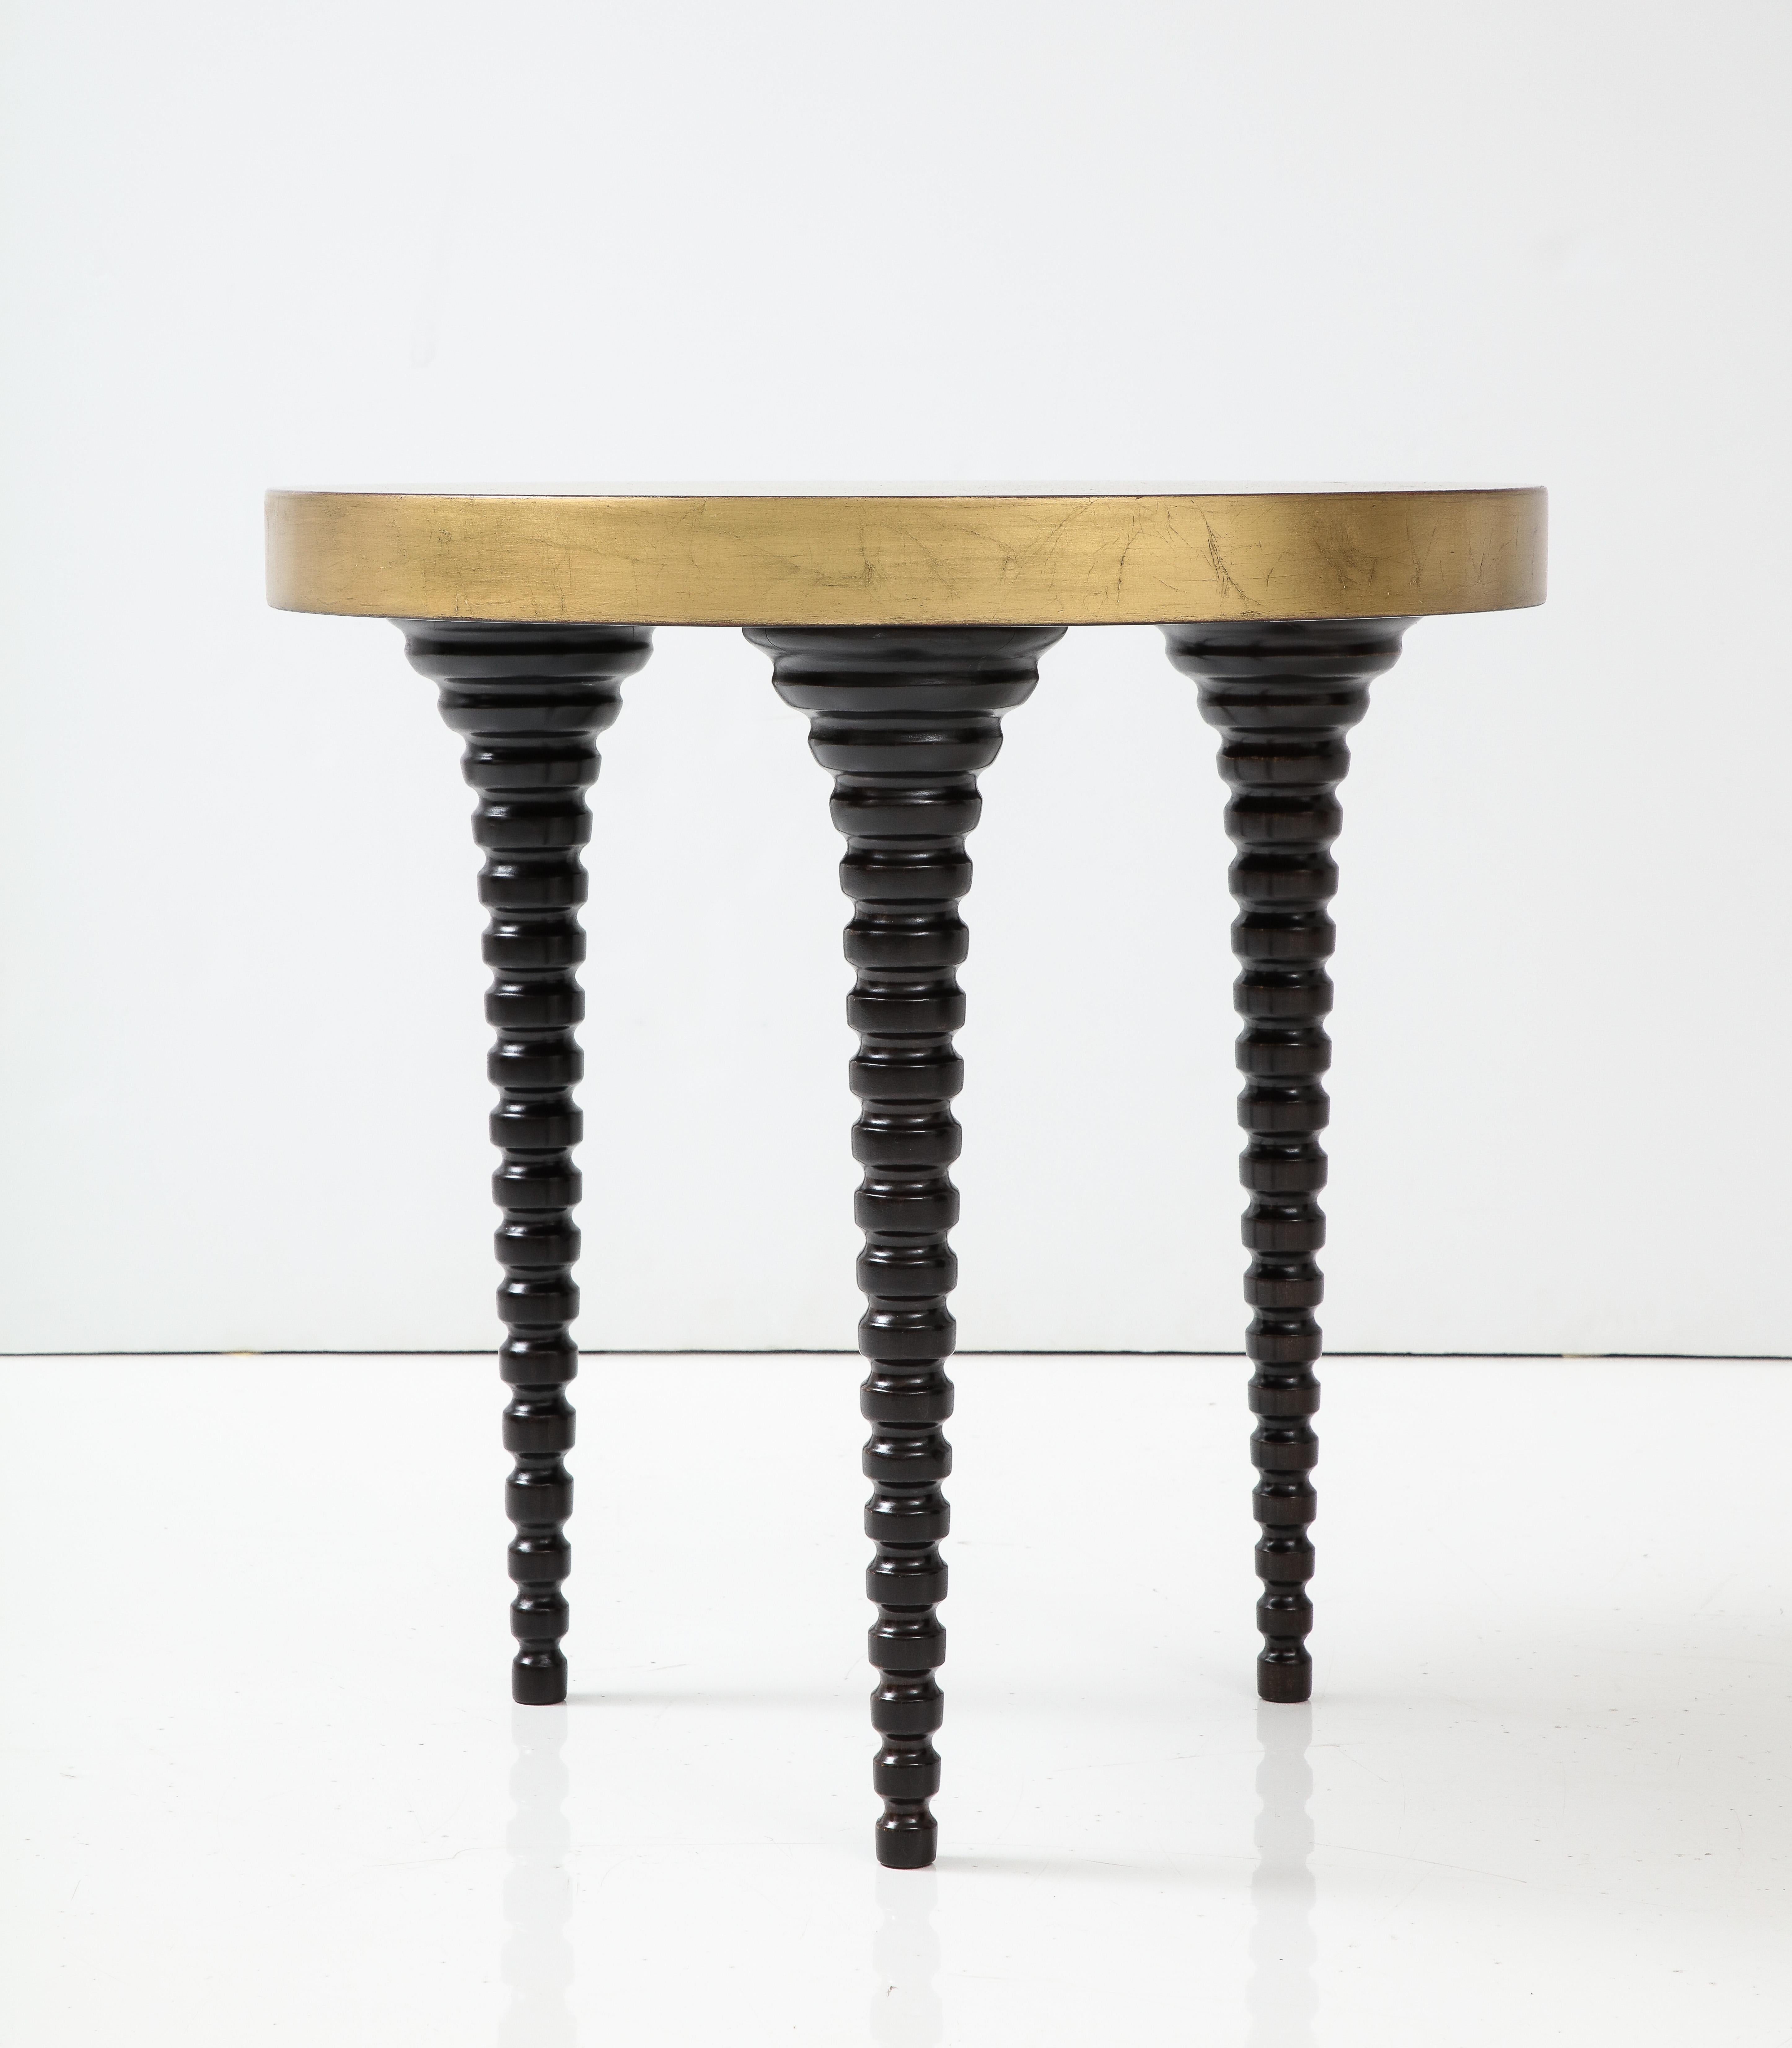 Turned wooden spindle leg table which has been beautifully restored.
The legs of the table are in a rich espresso finish which complement the glazed gilt leafed top.